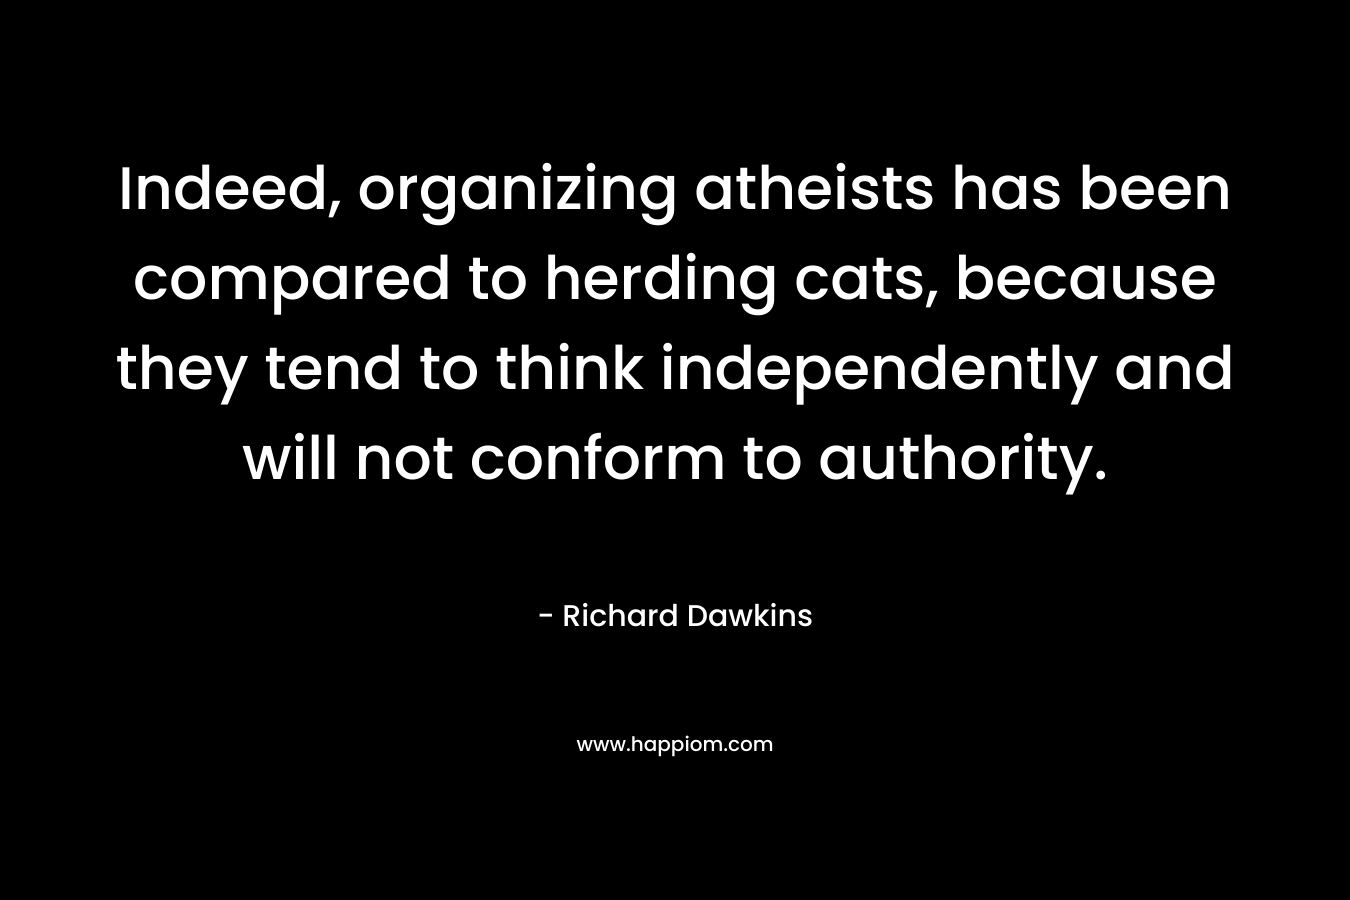 Indeed, organizing atheists has been compared to herding cats, because they tend to think independently and will not conform to authority. – Richard Dawkins